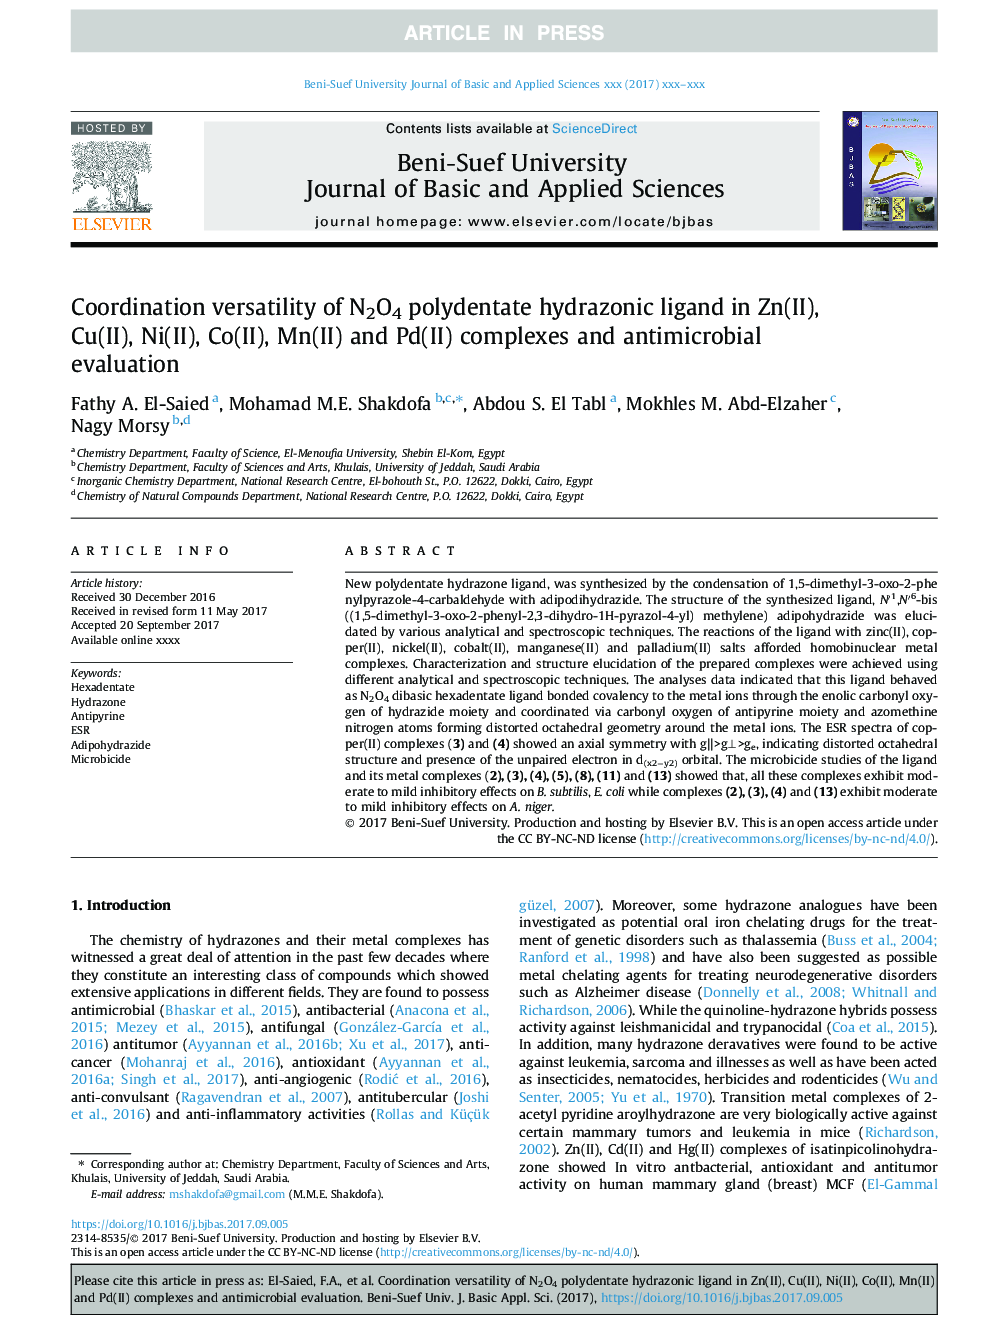 Coordination versatility of N2O4 polydentate hydrazonic ligand in Zn(II), Cu(II), Ni(II), Co(II), Mn(II) and Pd(II) complexes and antimicrobial evaluation